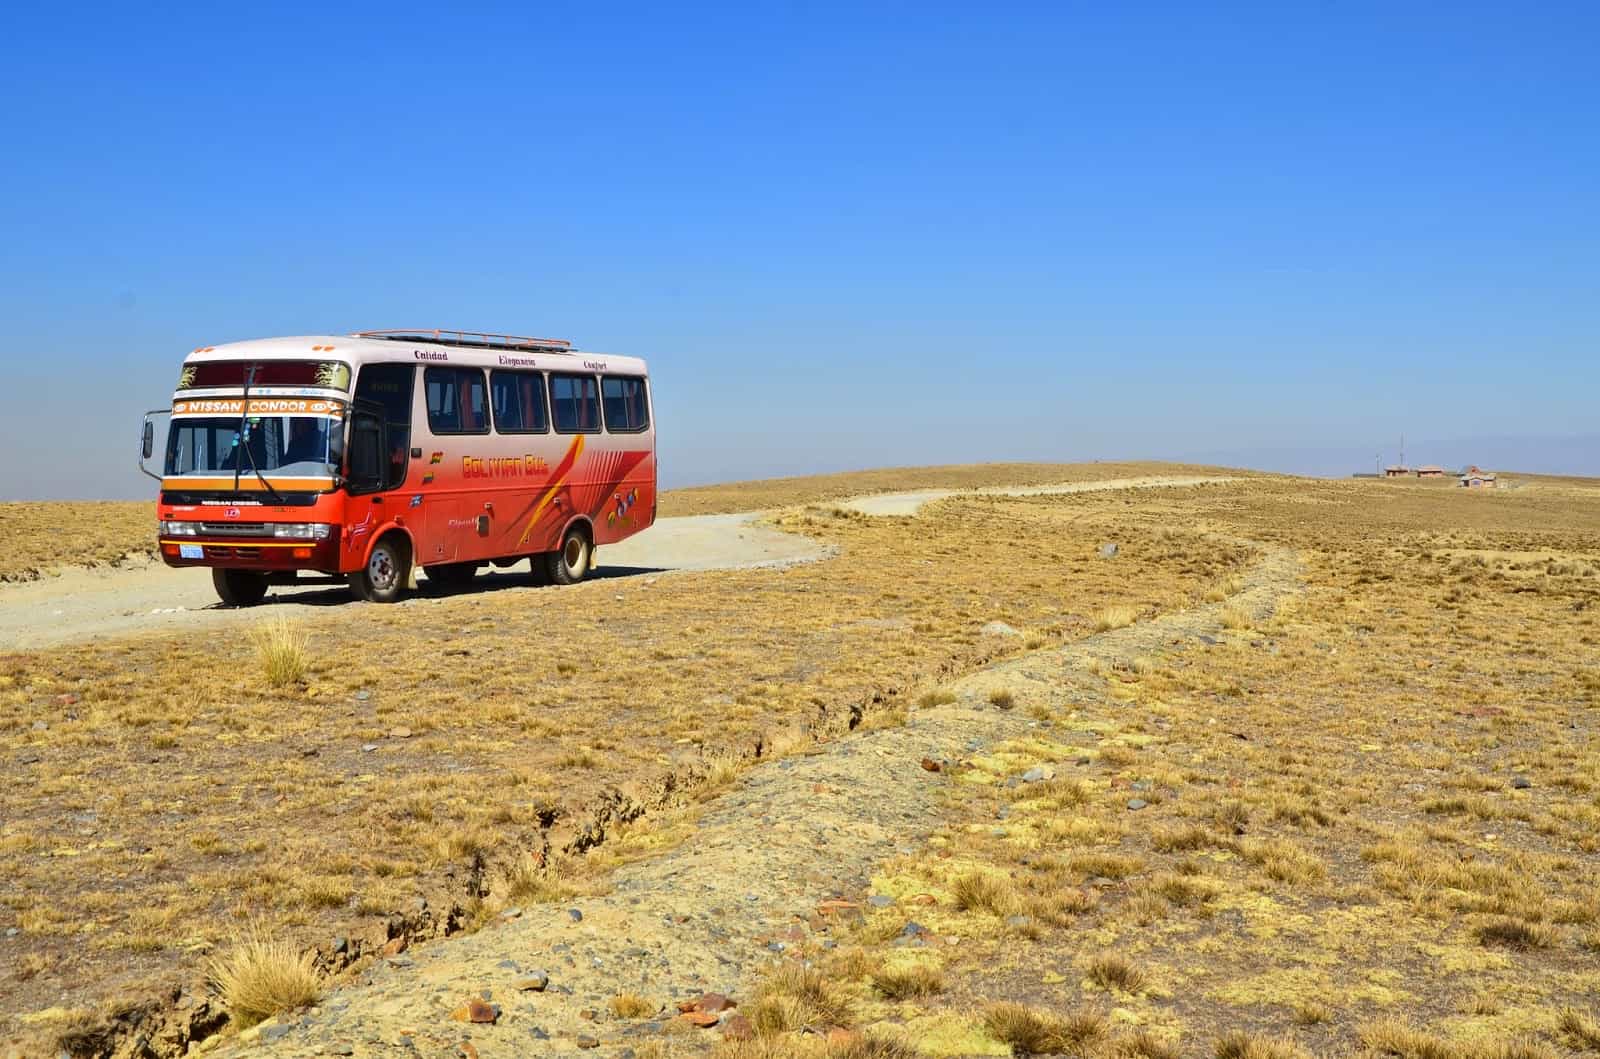 The Death Bus in Bolivia